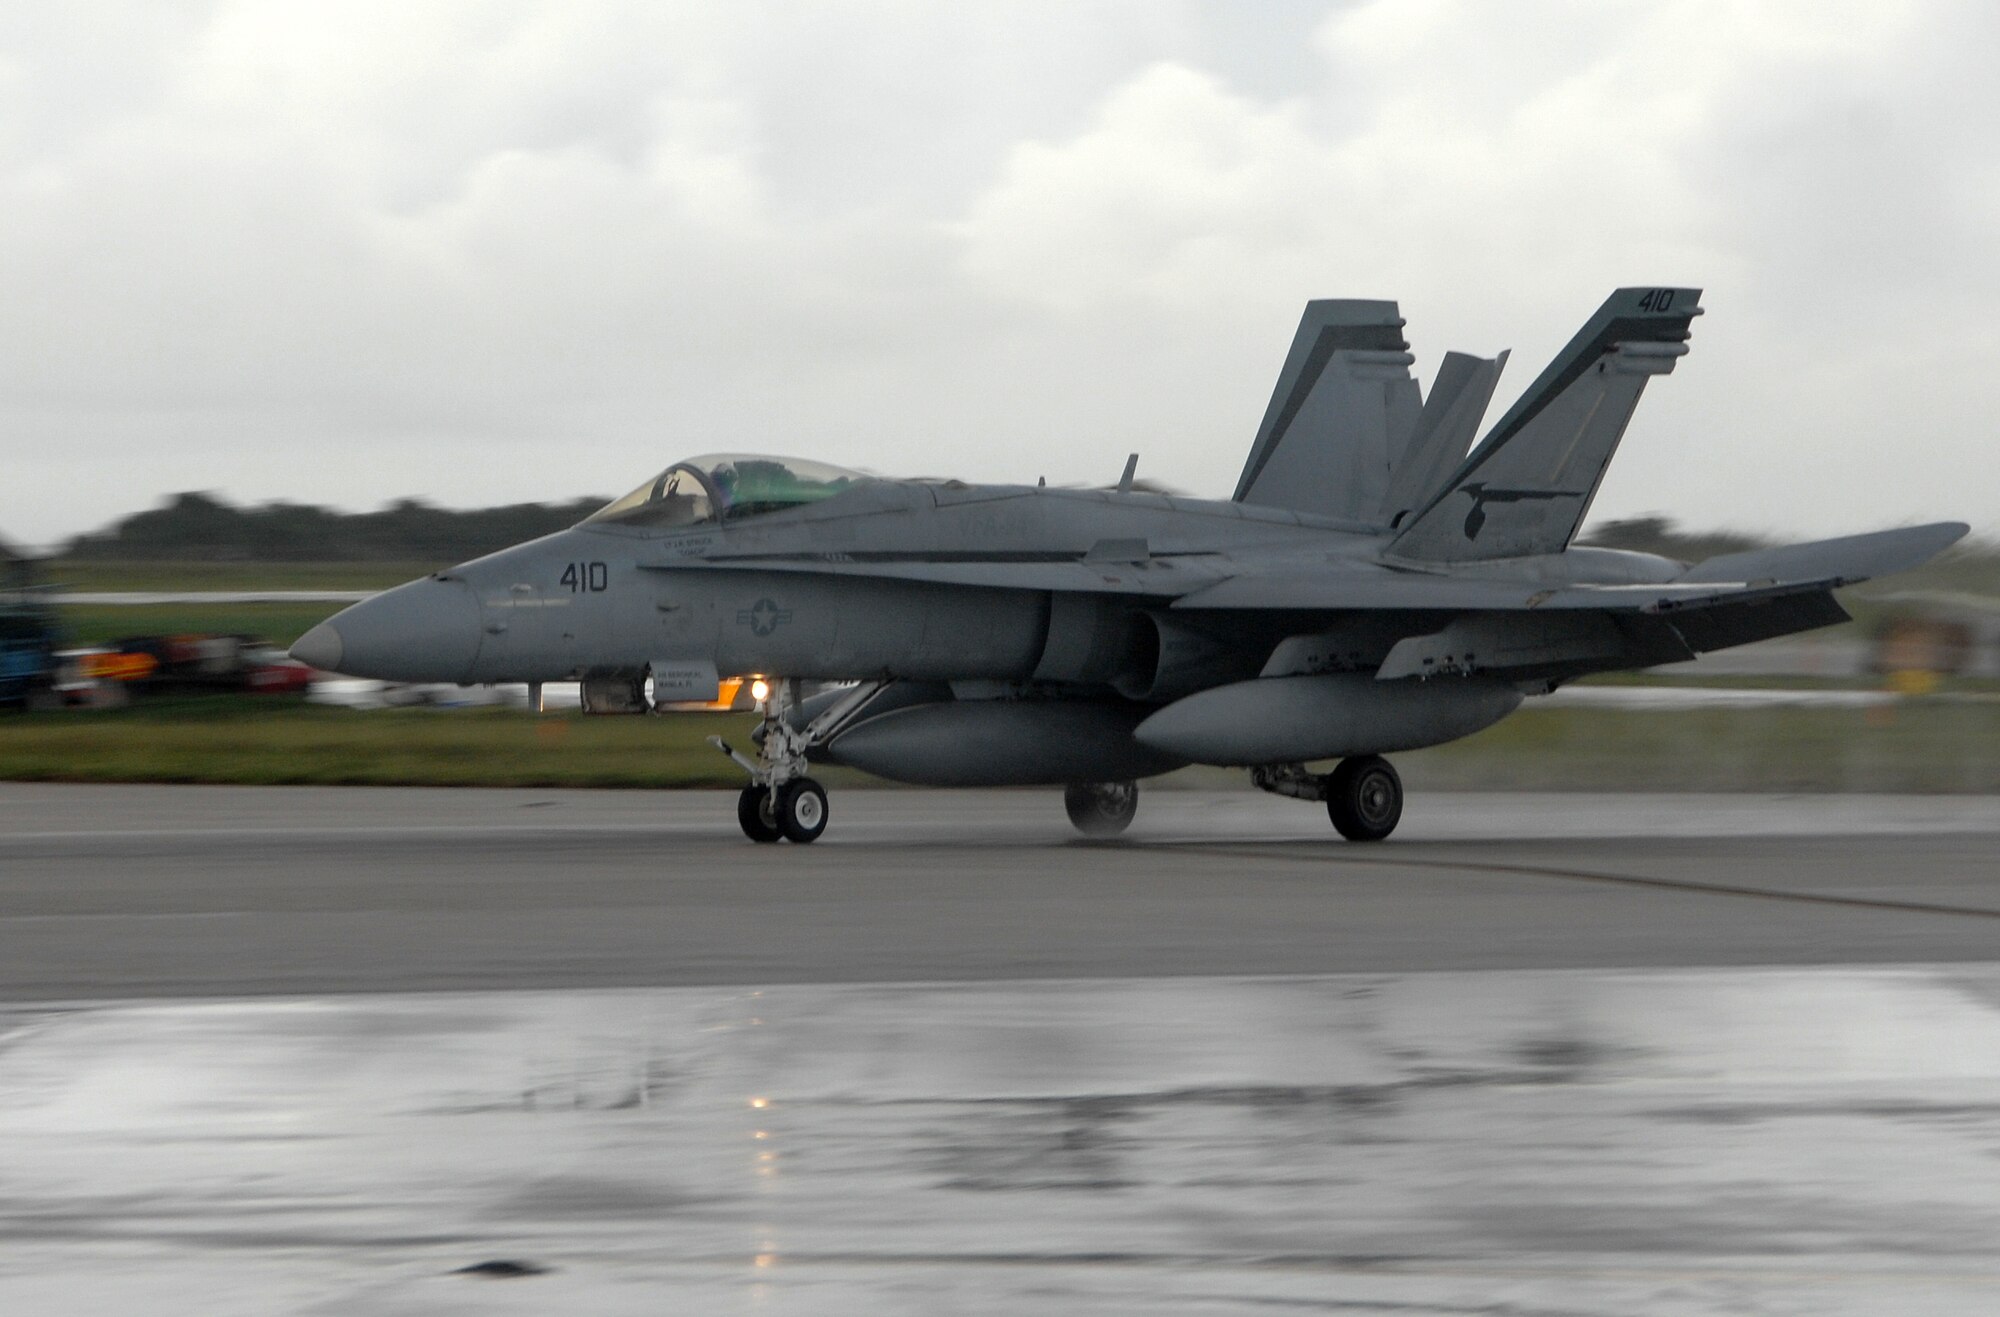 A U.S. Navy F/A-18 Hornet, from Strike Fighter Squadron 94 at Naval Air Station Lemoore, Calif., lands at Andersen Air Force Base July 9. The F/A-18 is a strike fighter aircraft flown by the Navy and Marine Corps.   Aircrews from 12 Hornets used Andersen as a resting point during their flight from California to Australia where they will participate in an exercise with the Australian Air Force.  (U.S. Air Force photo by Airman 1st Class Courtney Witt)